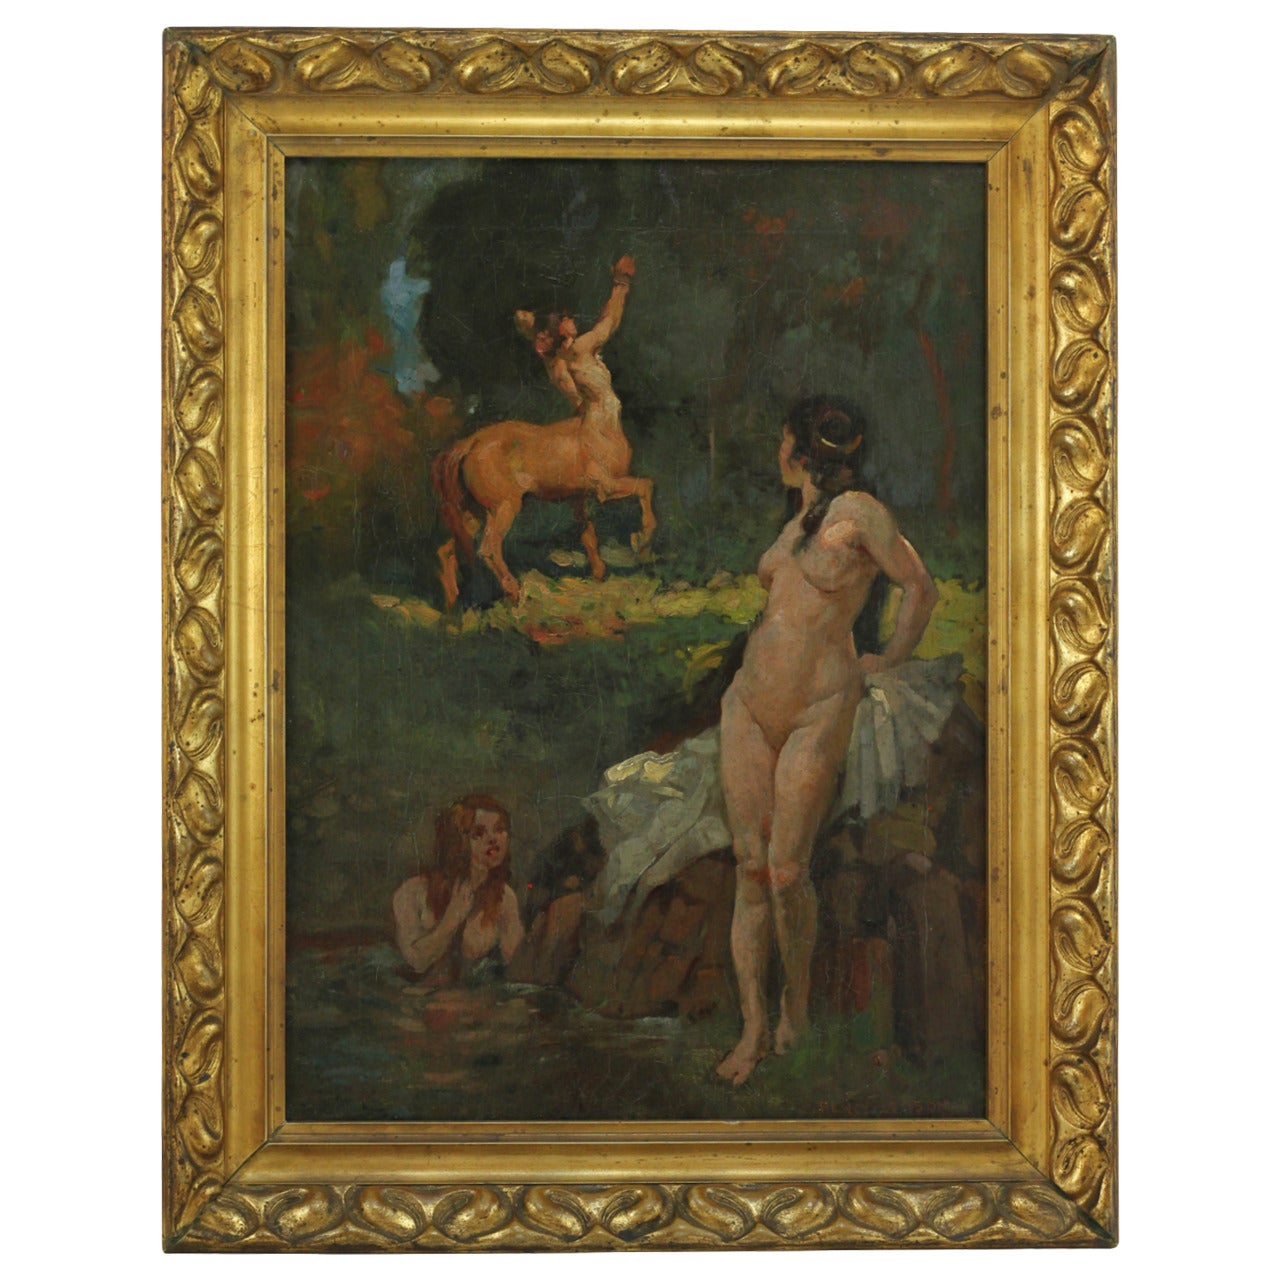 Early 20th Century Oil on Canvas by Percival Alexander Leason